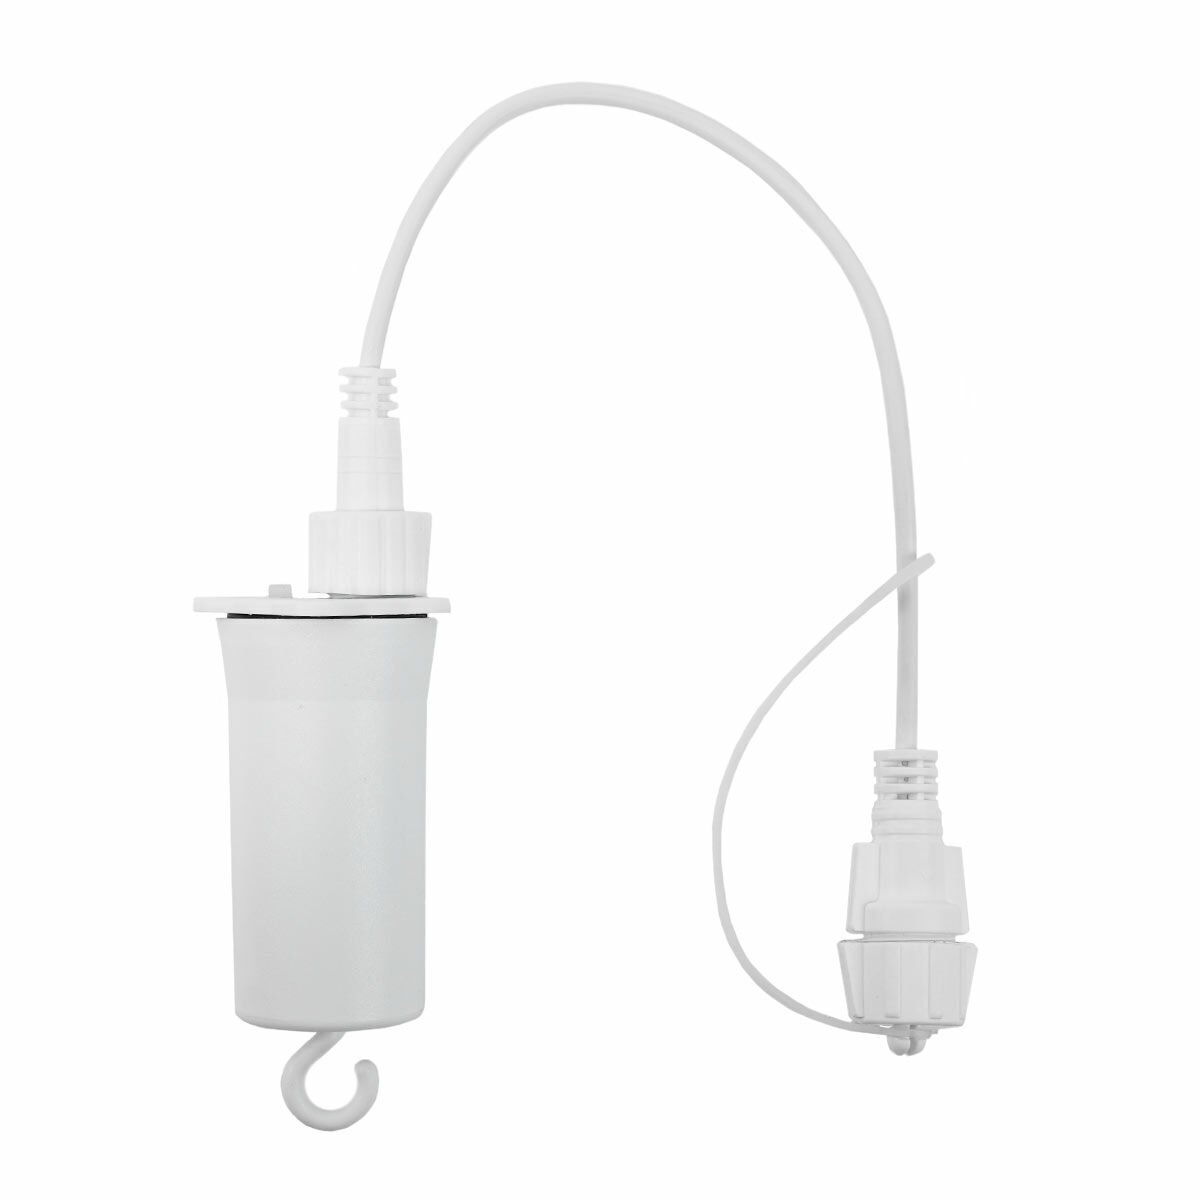 ConnectGo® AA Battery Box, White Rubber Cable image 1